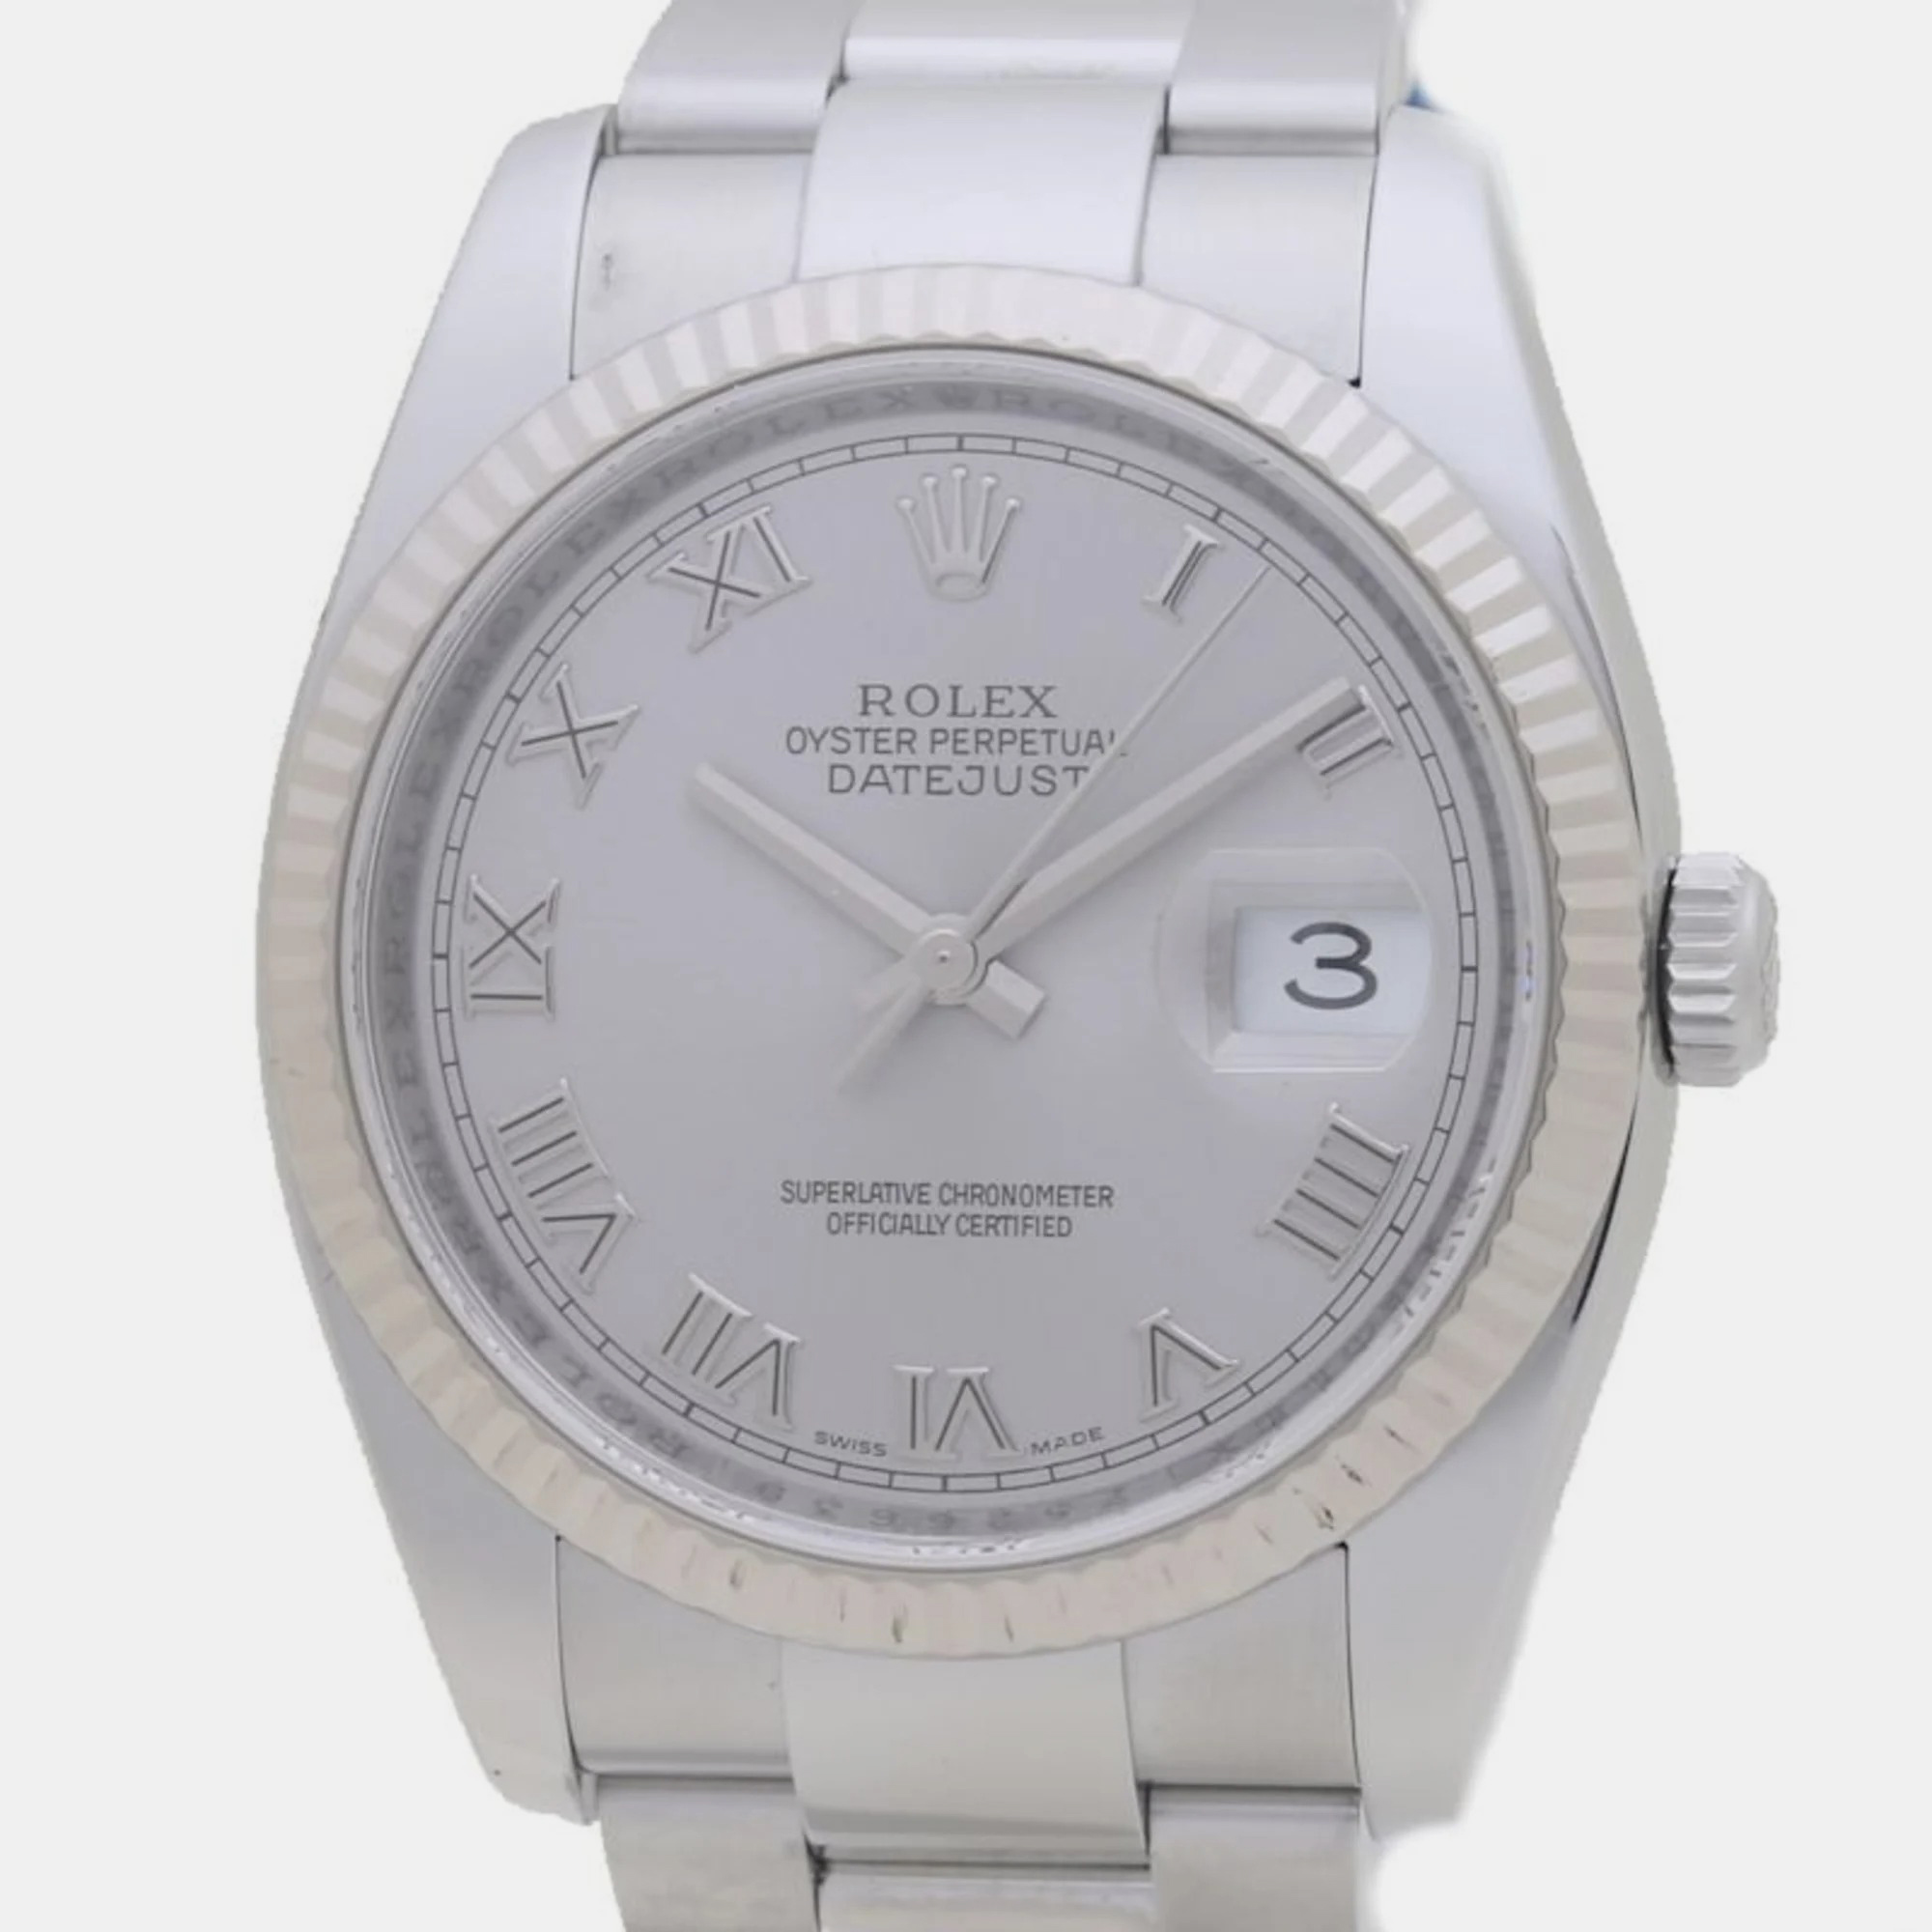 Pre-owned Rolex Silver 18k White Gold Stainless Steel Datejust 116234 Automatic Men's Wristwatch 36 Mm